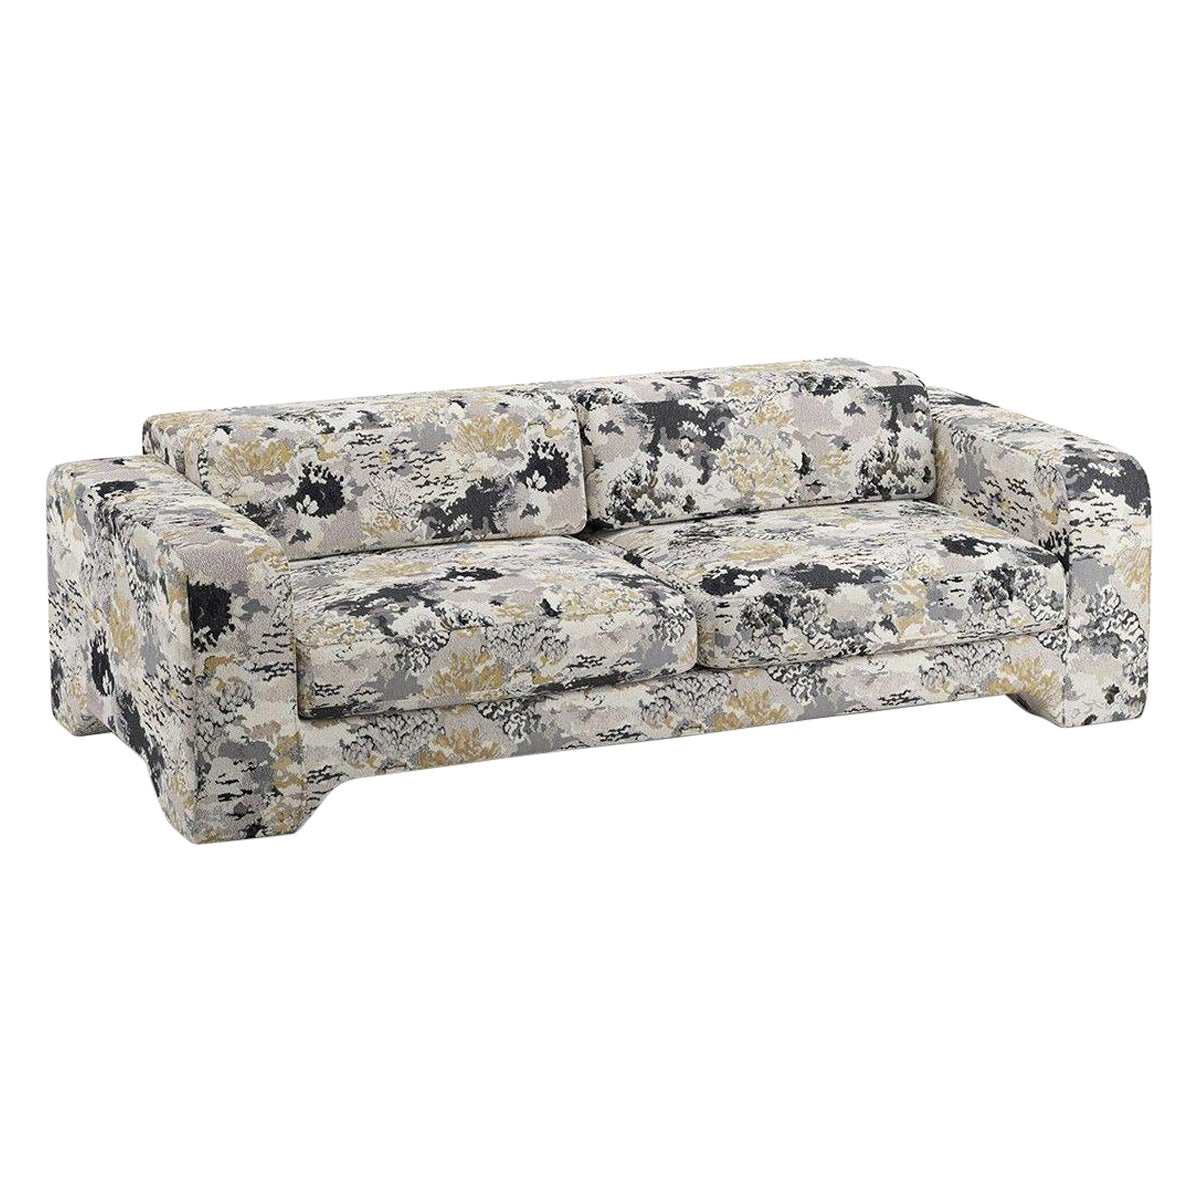 Popus Editions Giovanna 4 Seater Sofa in Charcoal Marrakech Jacquard Fabric